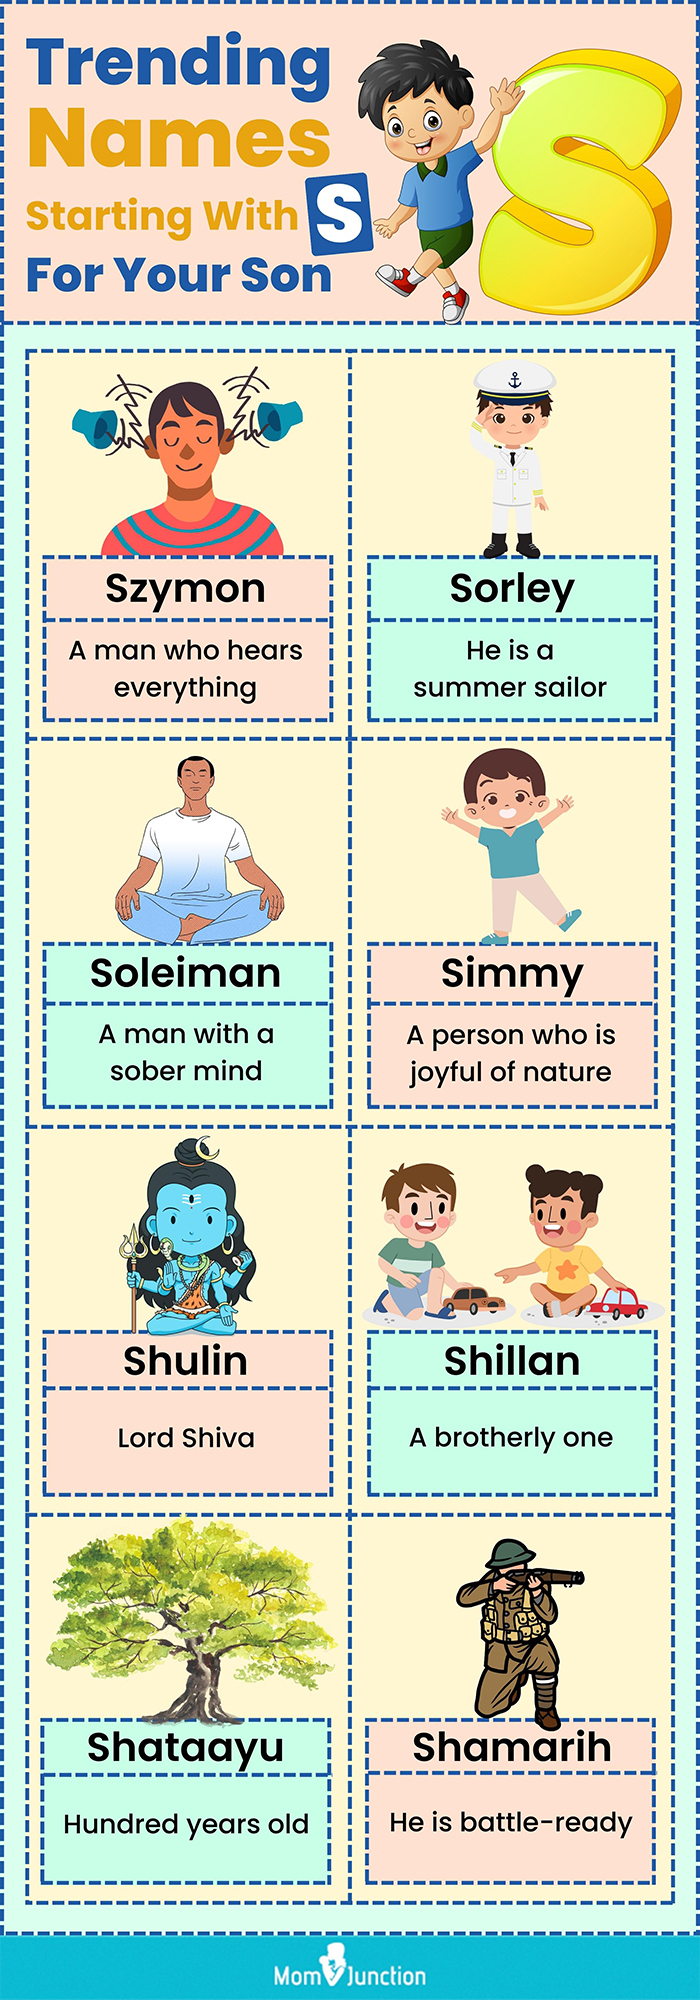 trending names starting with s for your son (infographic)